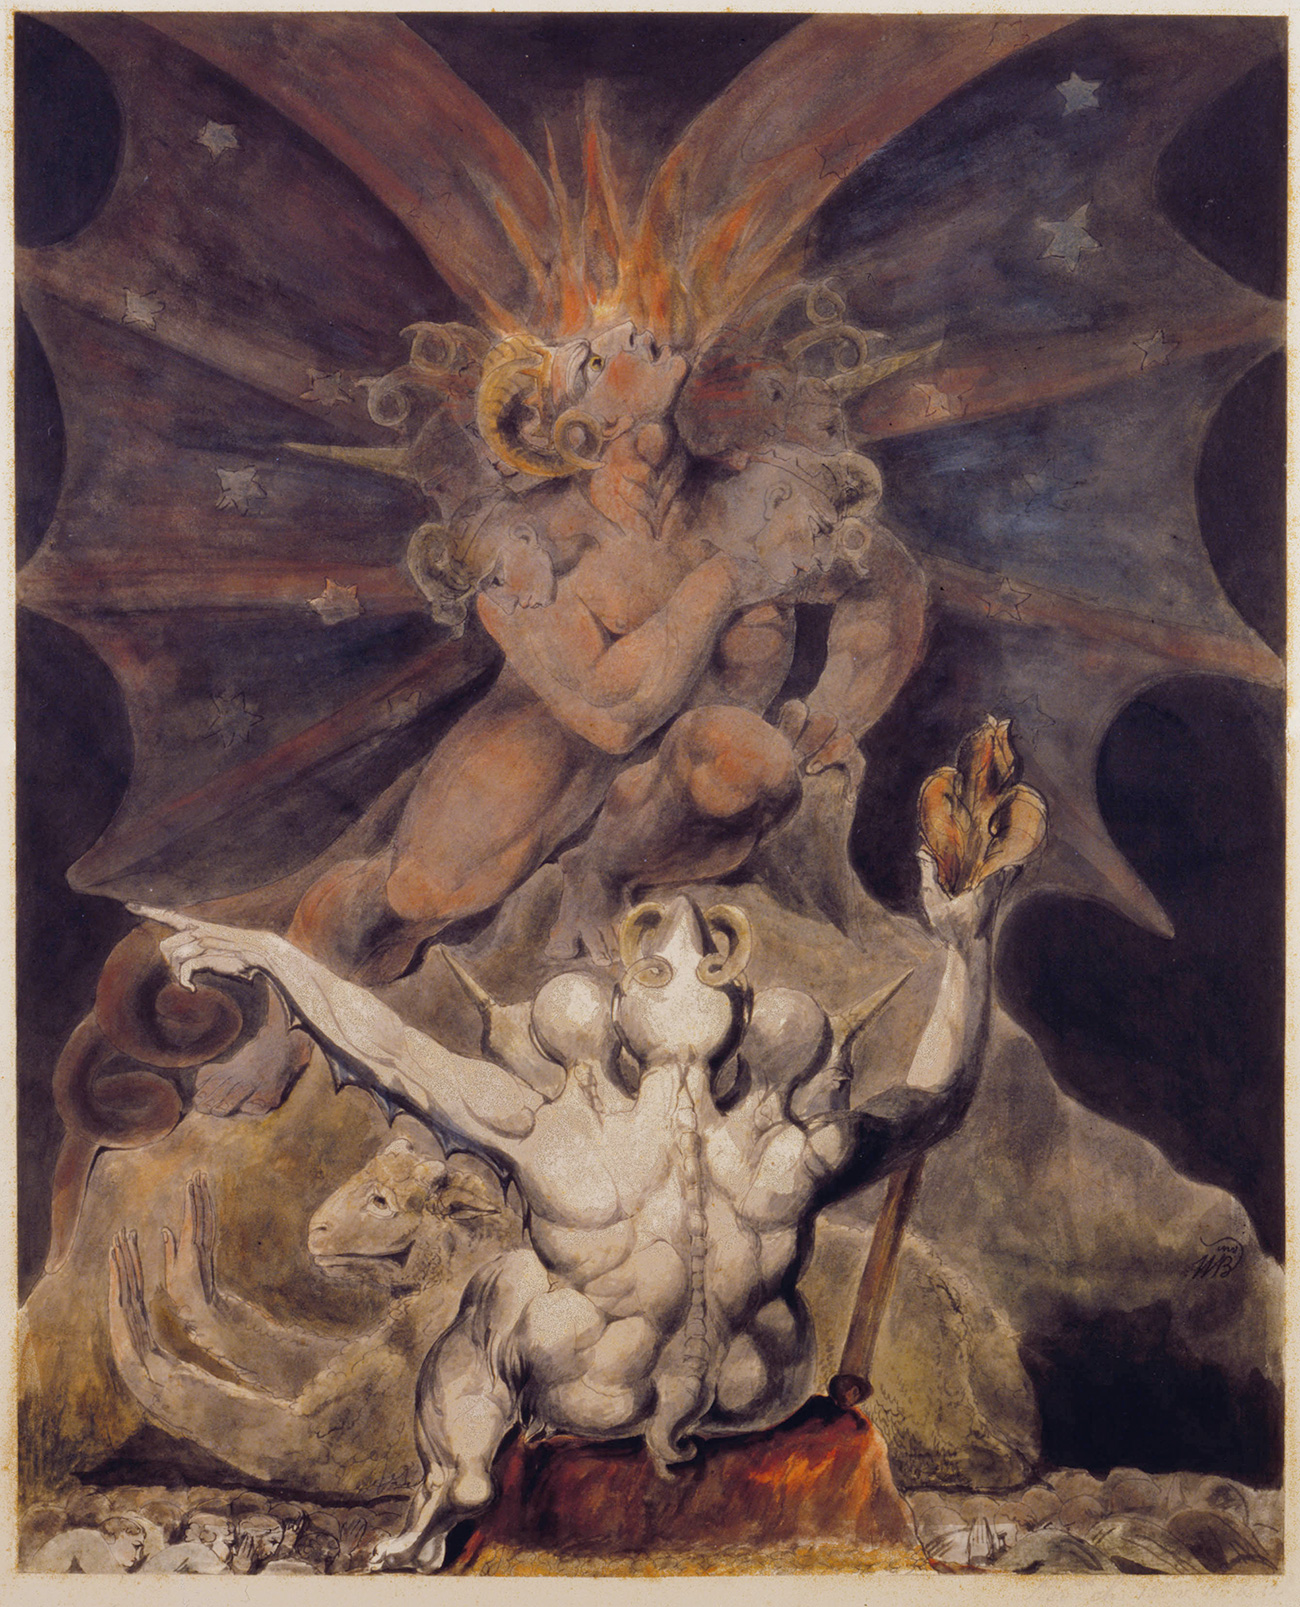 "The Number of the Beast is 666". Source: William Blake Archive